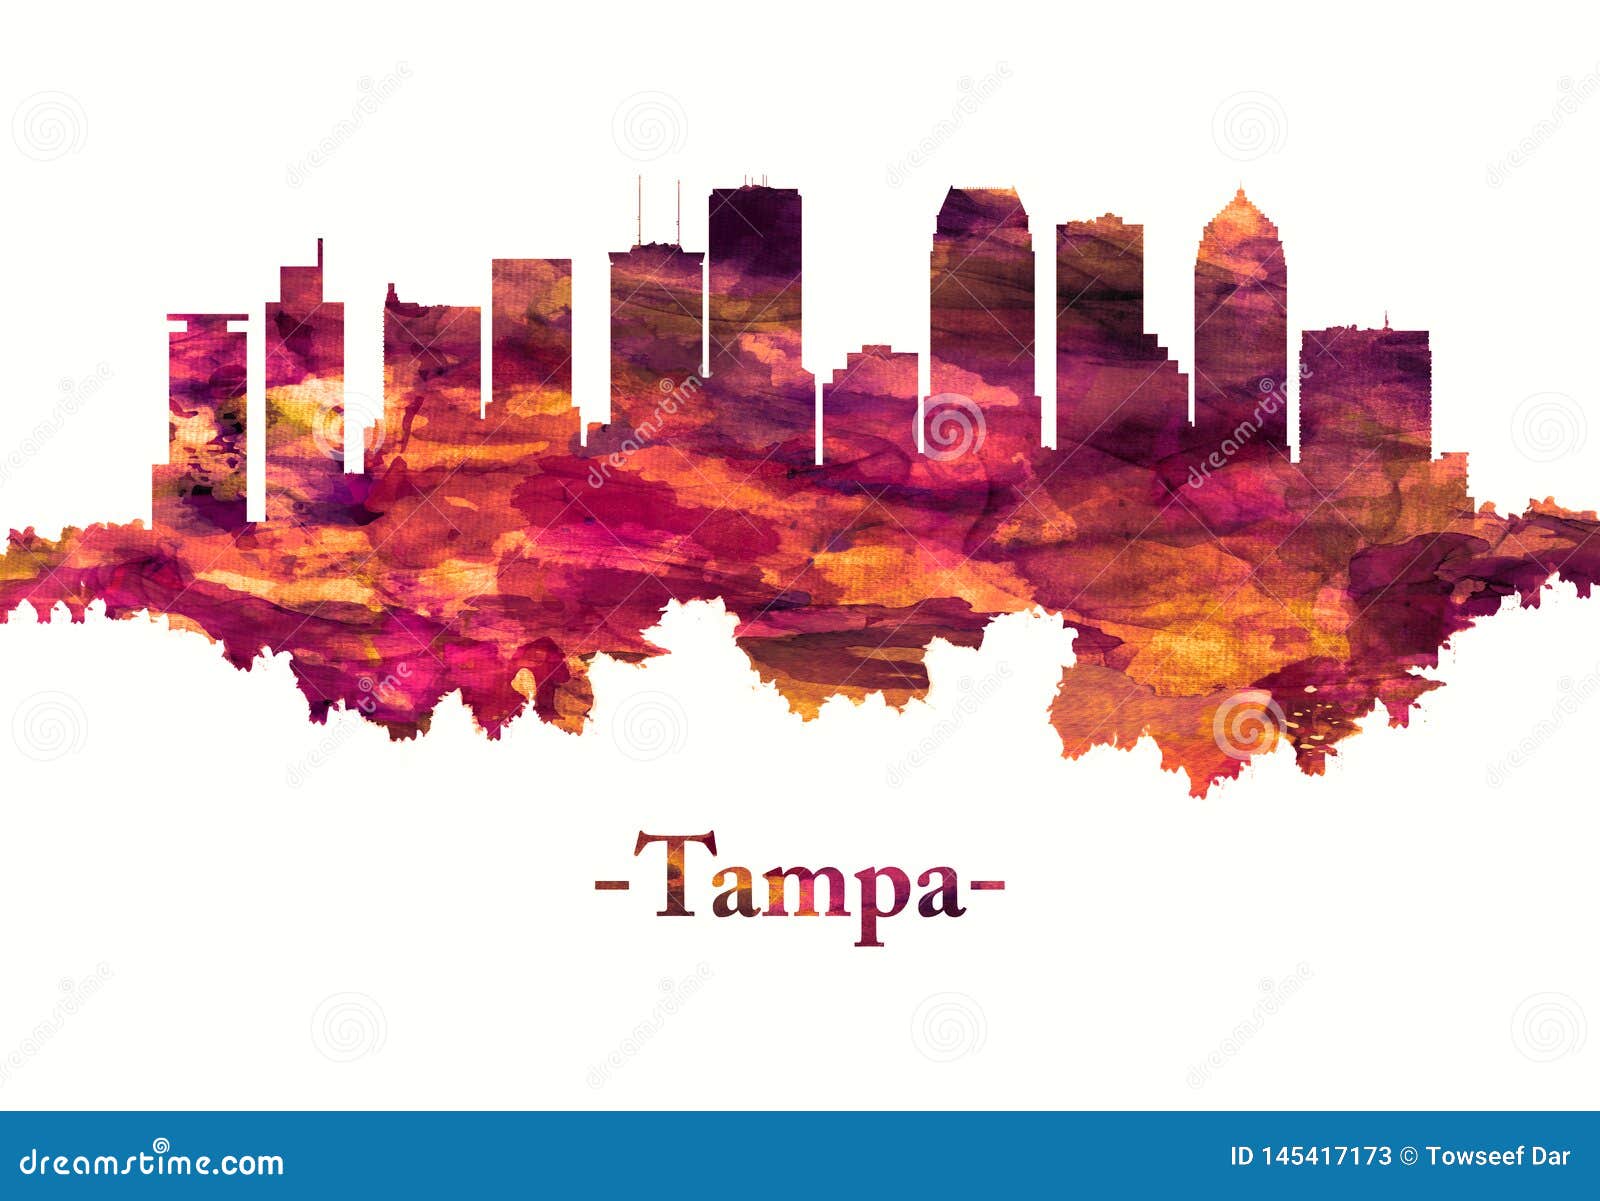 tampa florida skyline in red